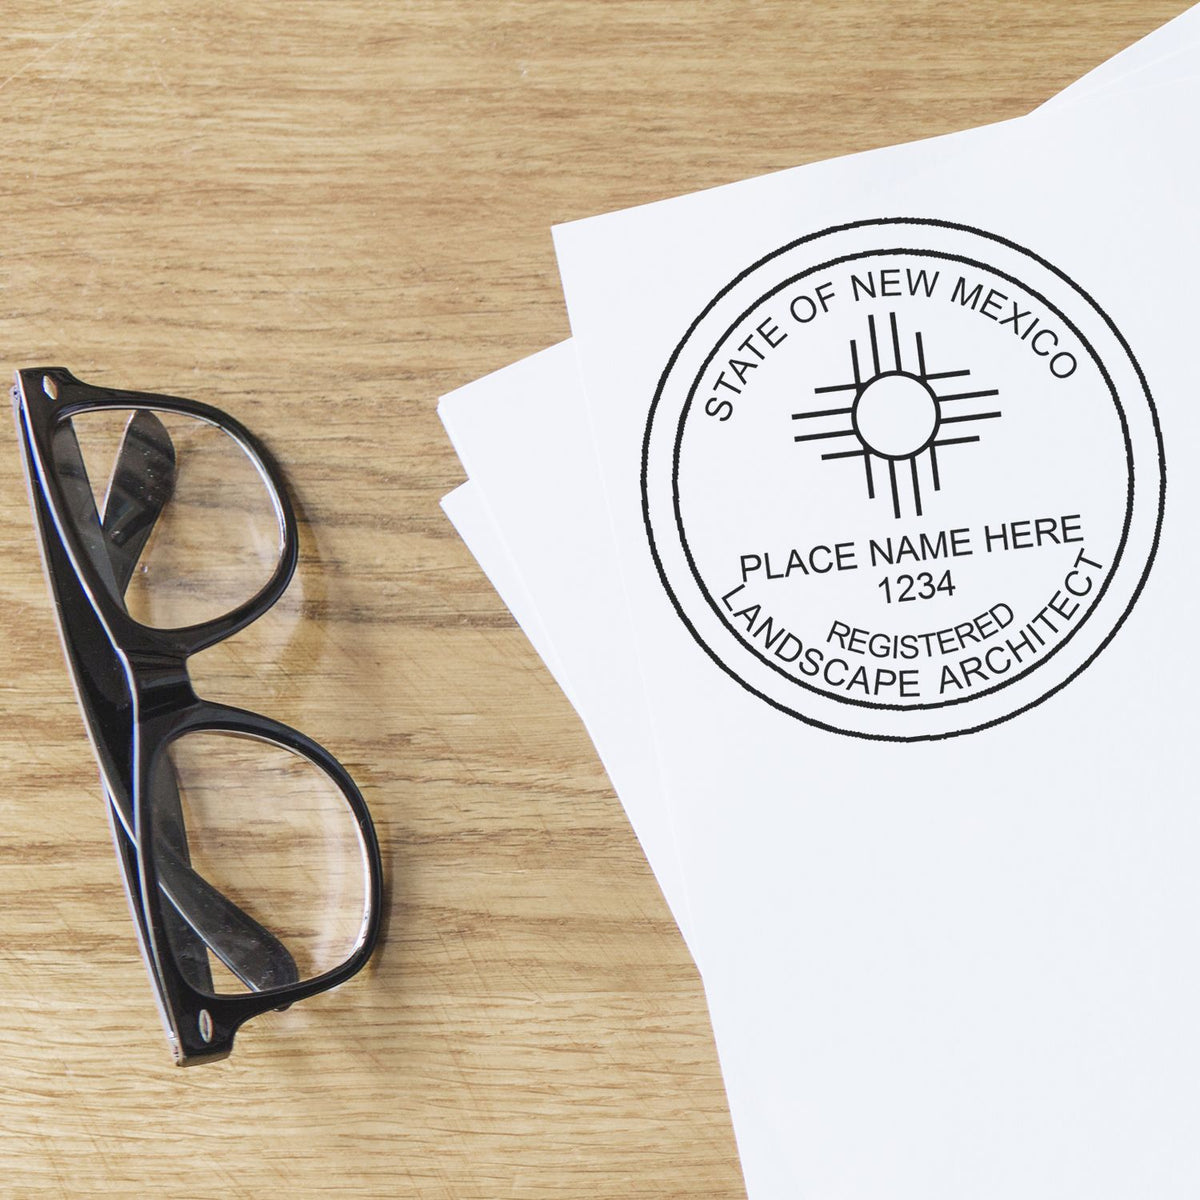 This paper is stamped with a sample imprint of the New Mexico Landscape Architectural Seal Stamp, signifying its quality and reliability.